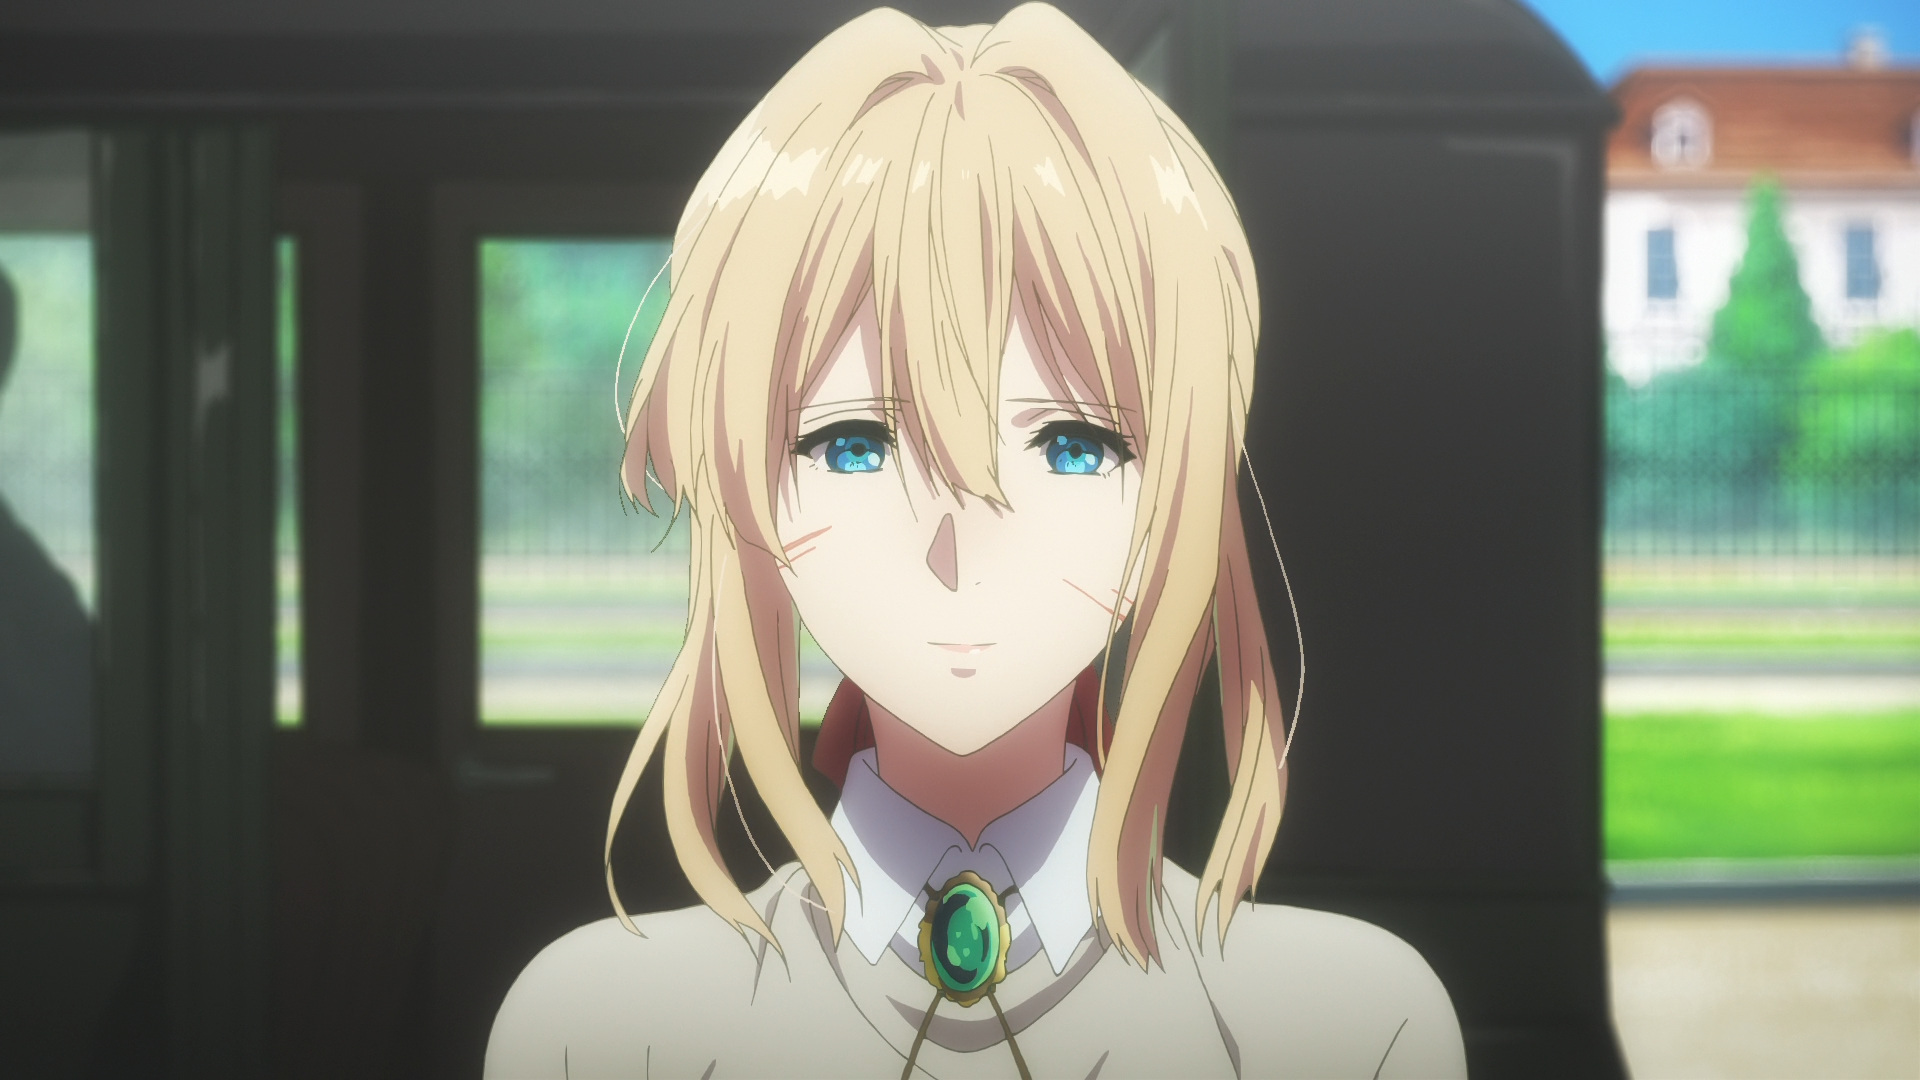 Among all the shows I’ve had the pleasure of reviewing, Violet Evergarden h...